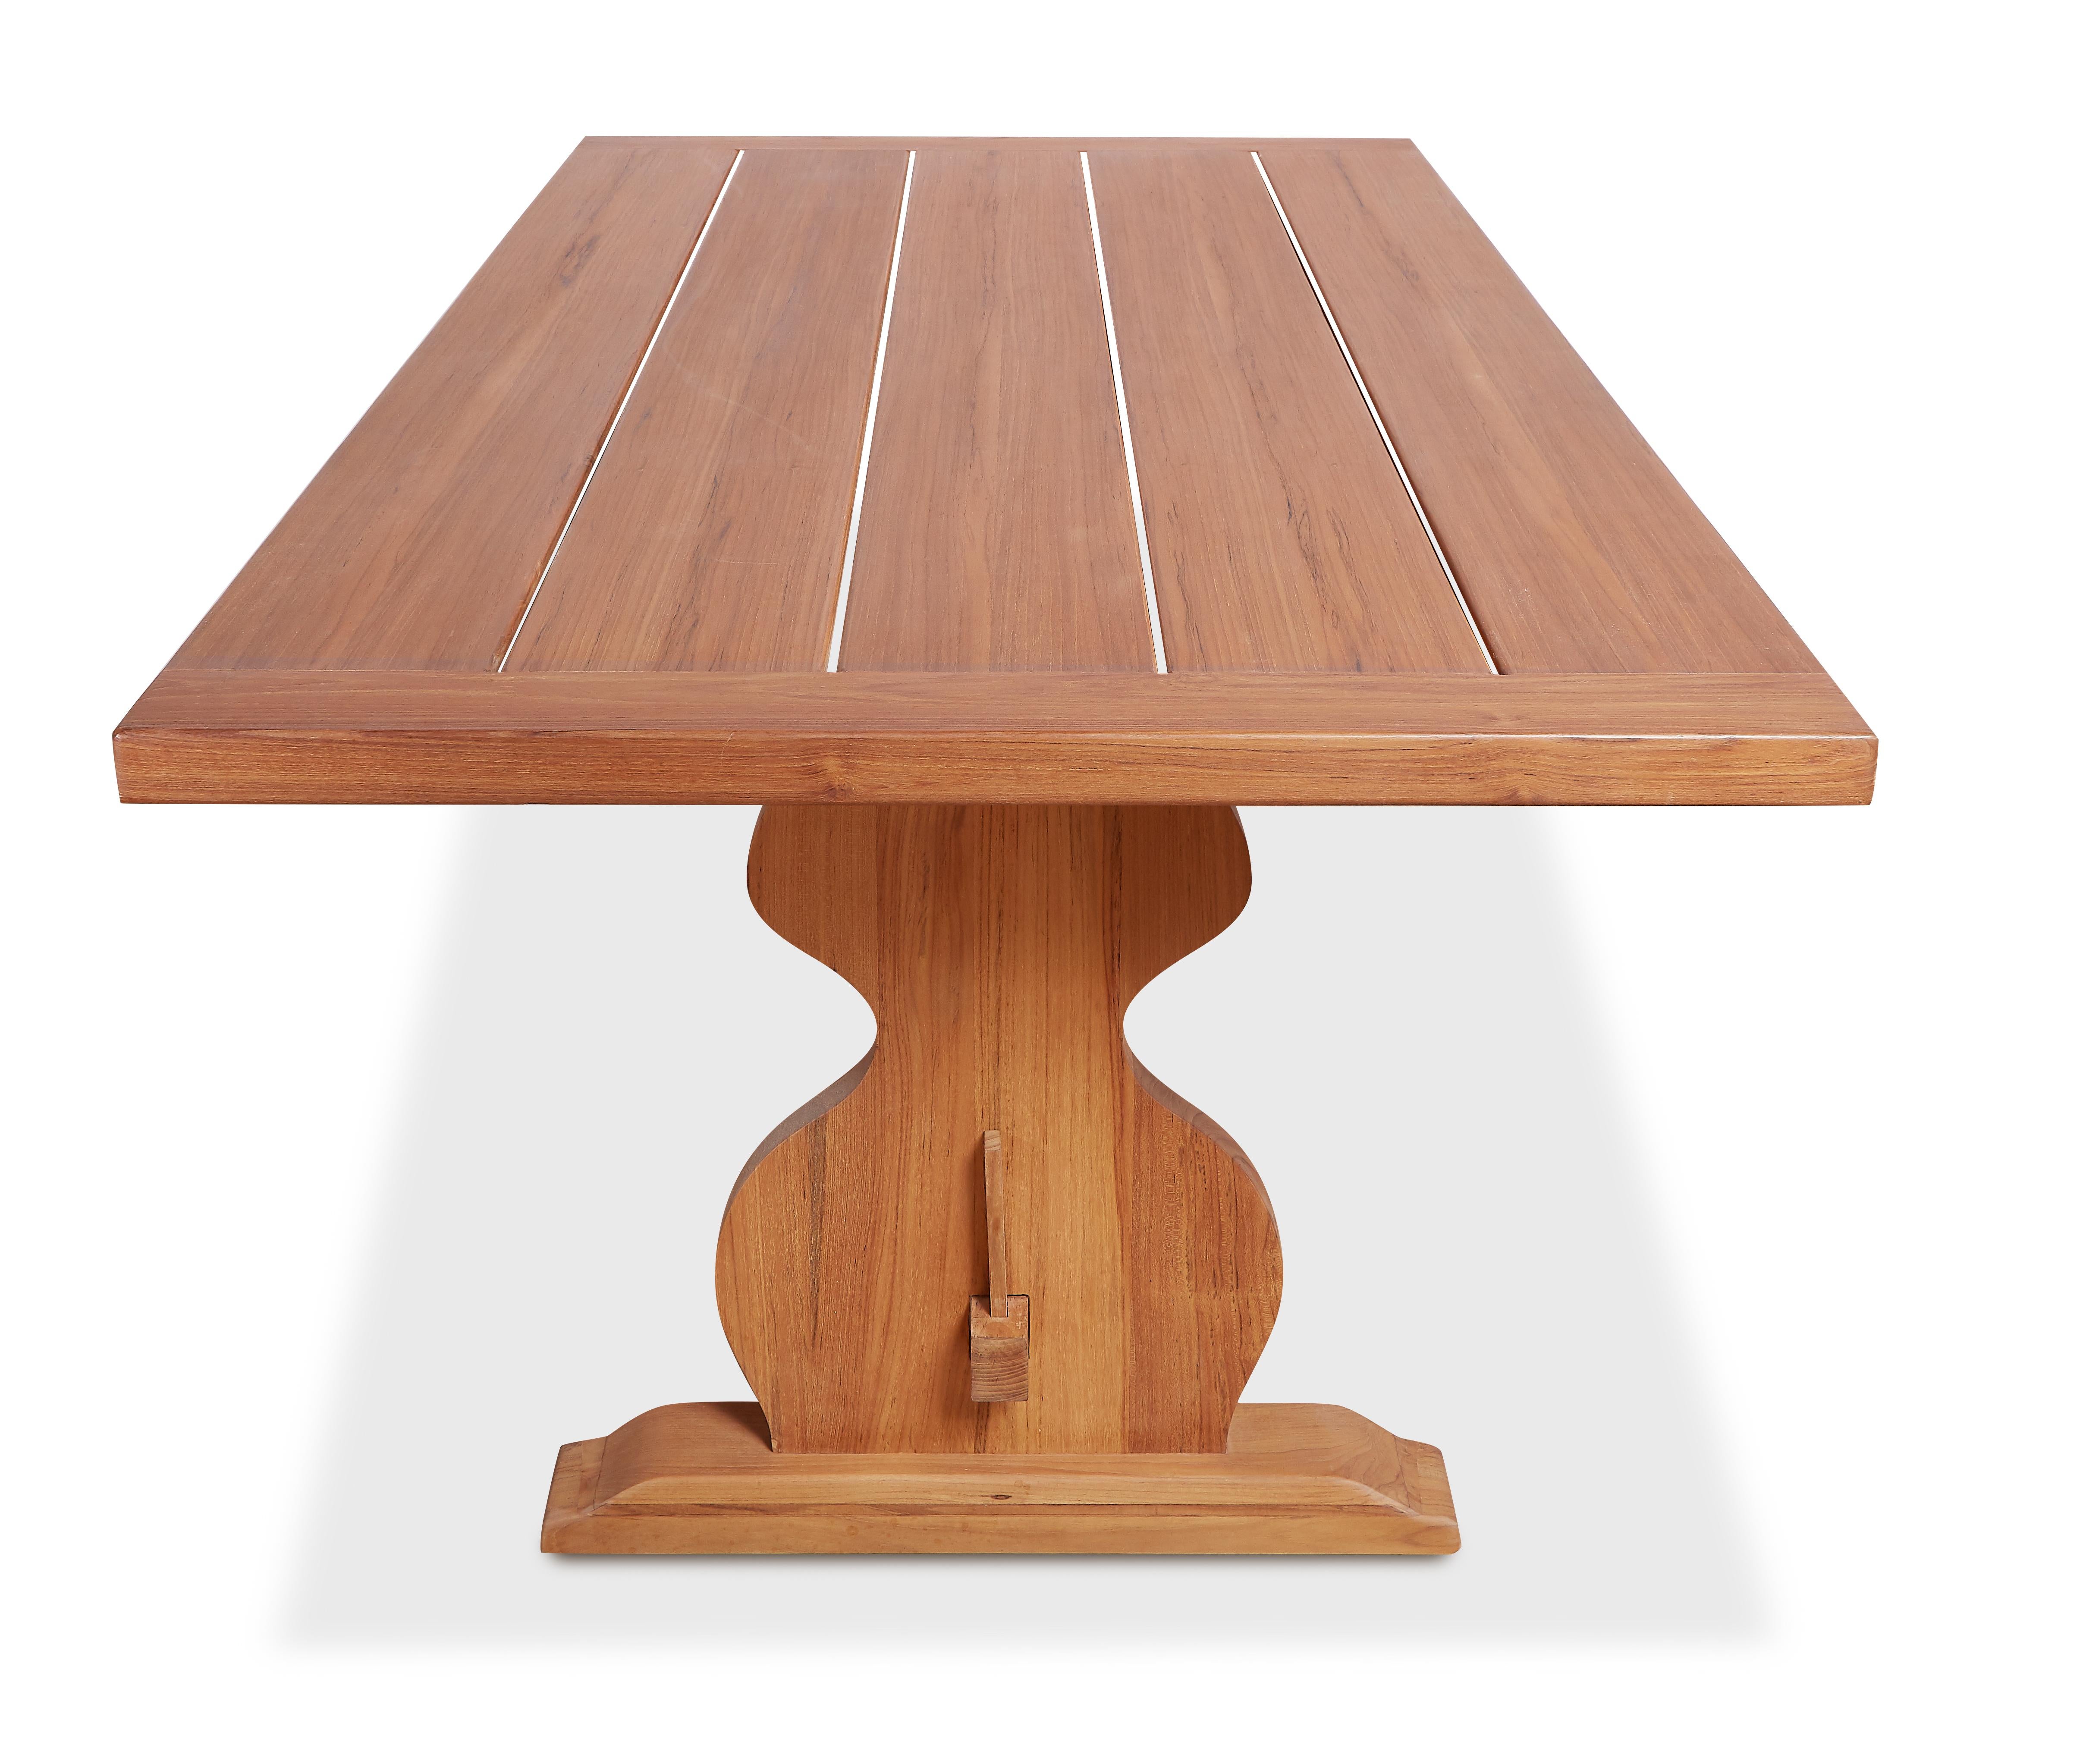 Our Graham Dining table is made of radiant, sustainably sourced teak. Inspired by early 20th century French tables, the Graham features a five-plank top supported by a curvaceous trestle base with mortise and tenon joinery. Exposure to the elements